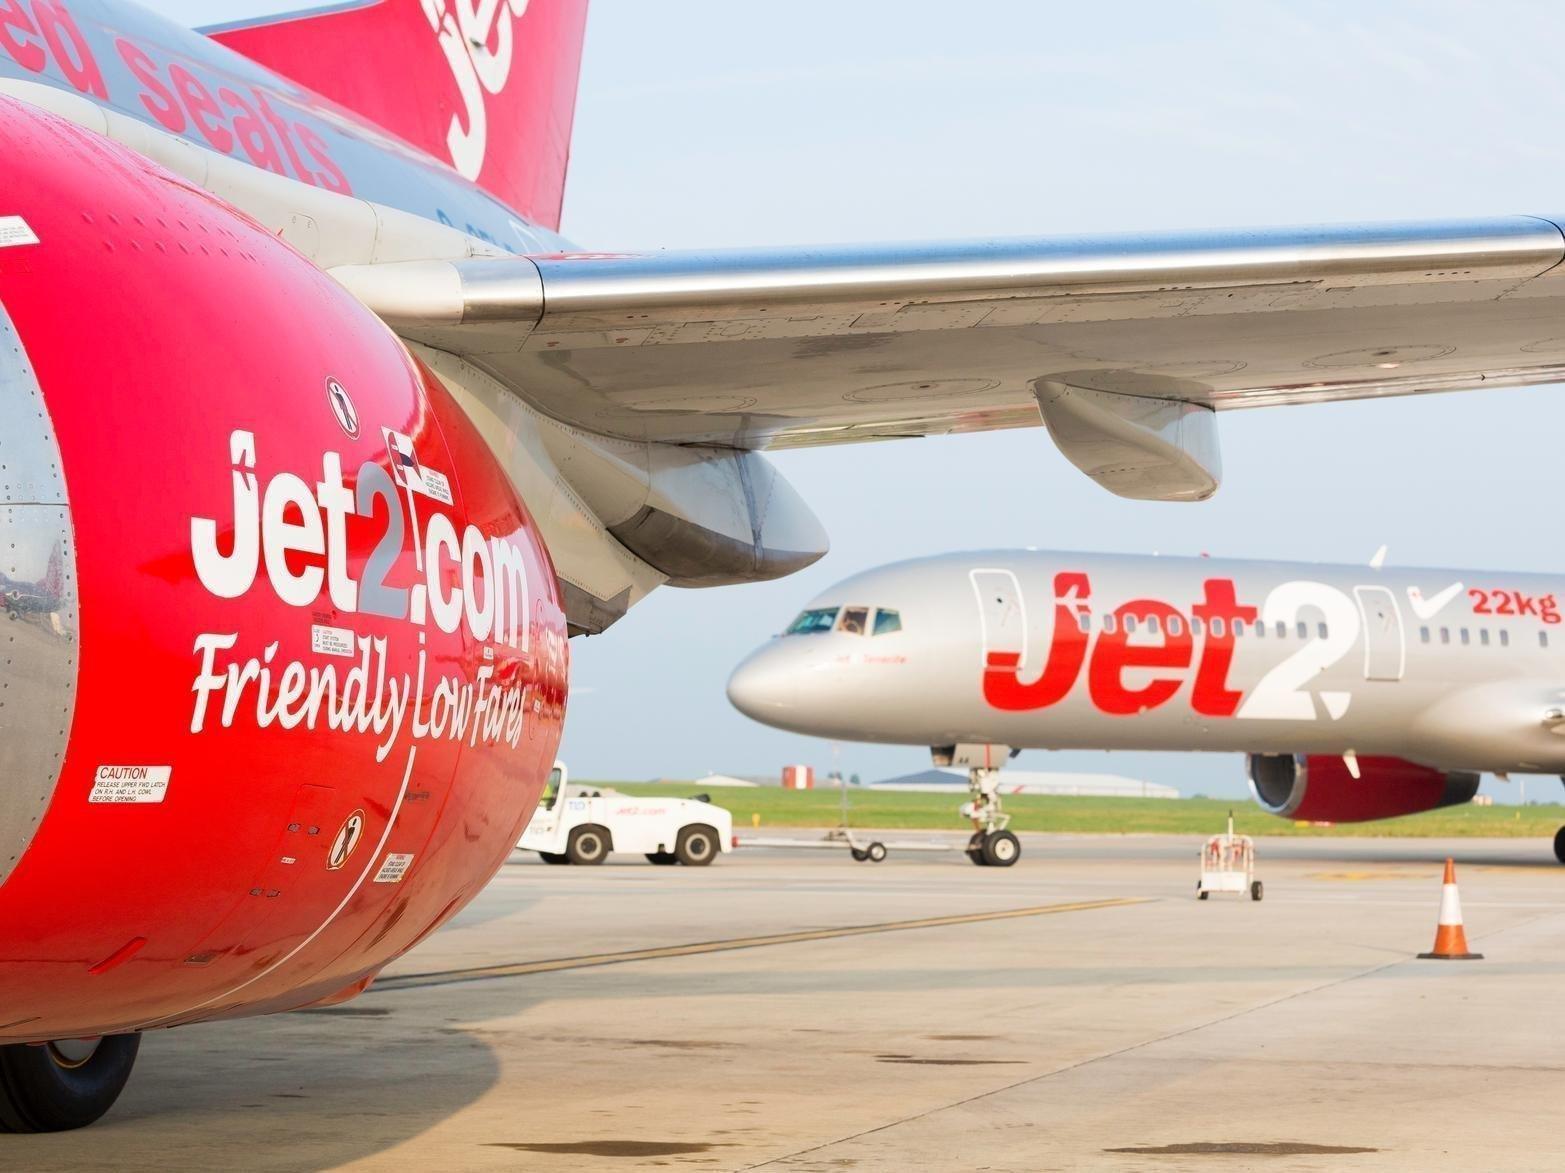 If you are planning to head of for some ski action then you'll be pleased to know that Jet2 has already launched two new ski destinations this winter.